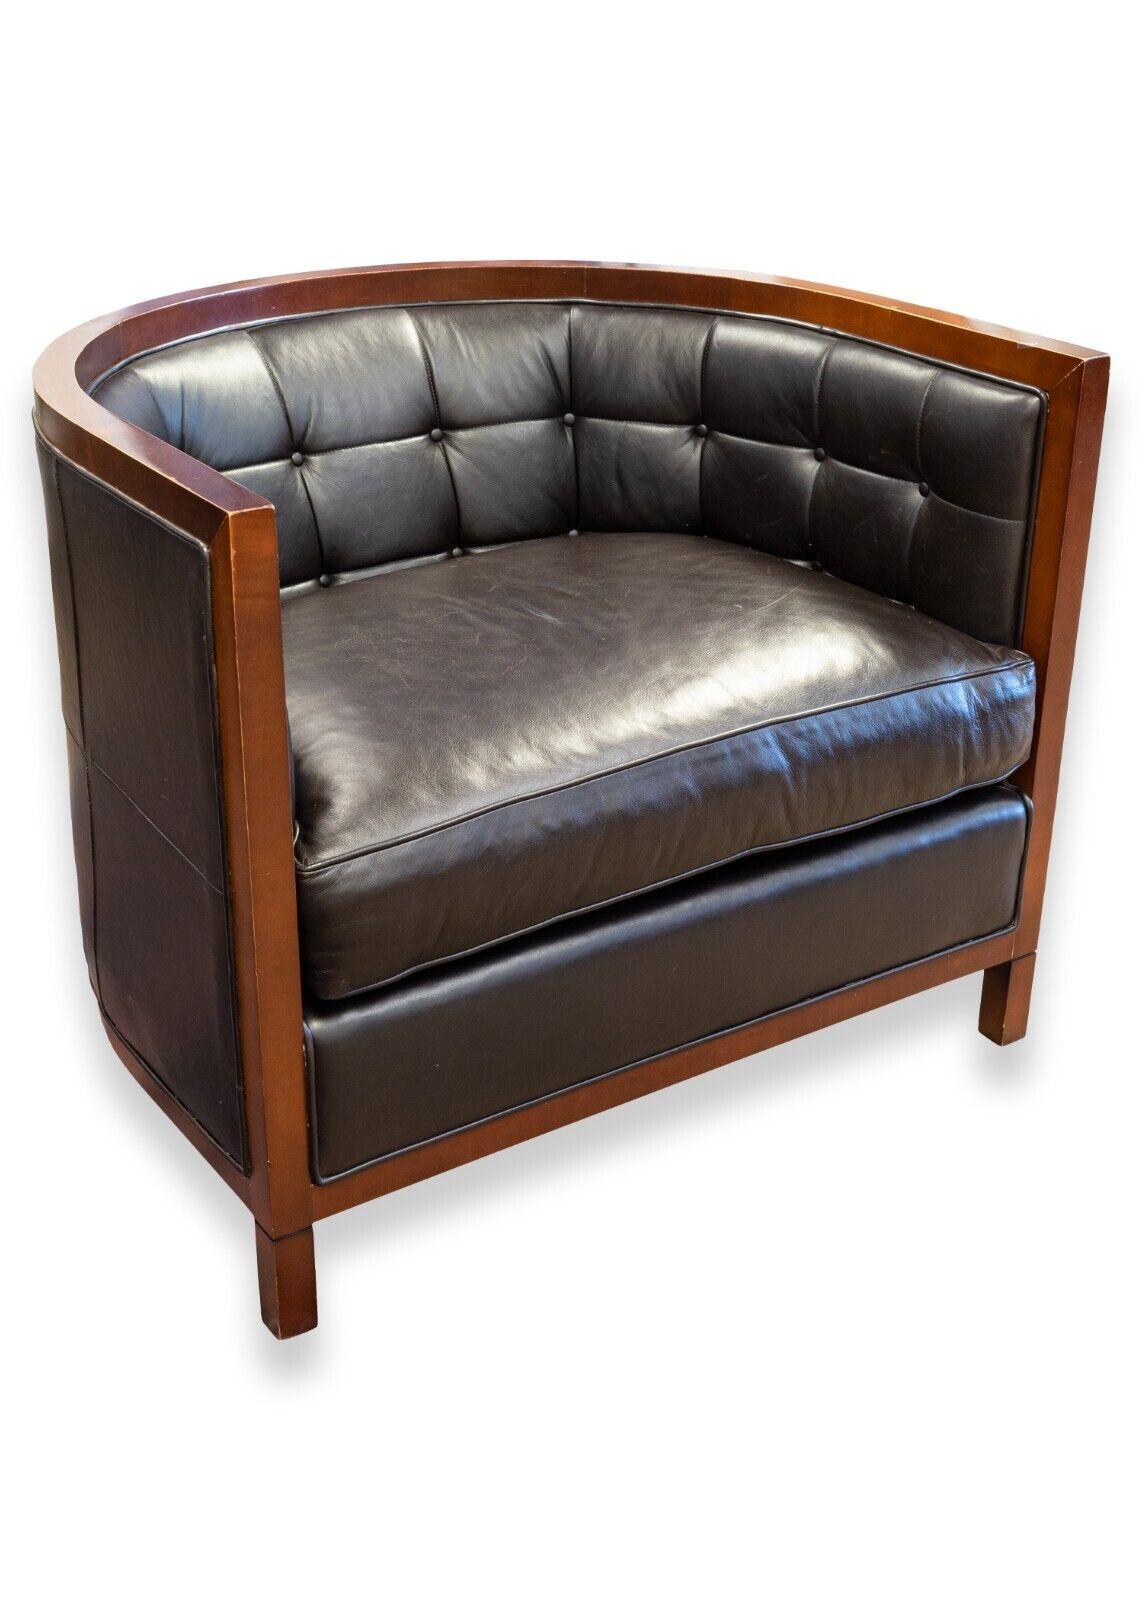 A pair of Baker black leather tufted tub chairs with wood trim. These wonderful accent chairs have a very attractive design including a balanced mix of rounded sides and sharp edges. These chairs feature a dark wood trim and legs, and are